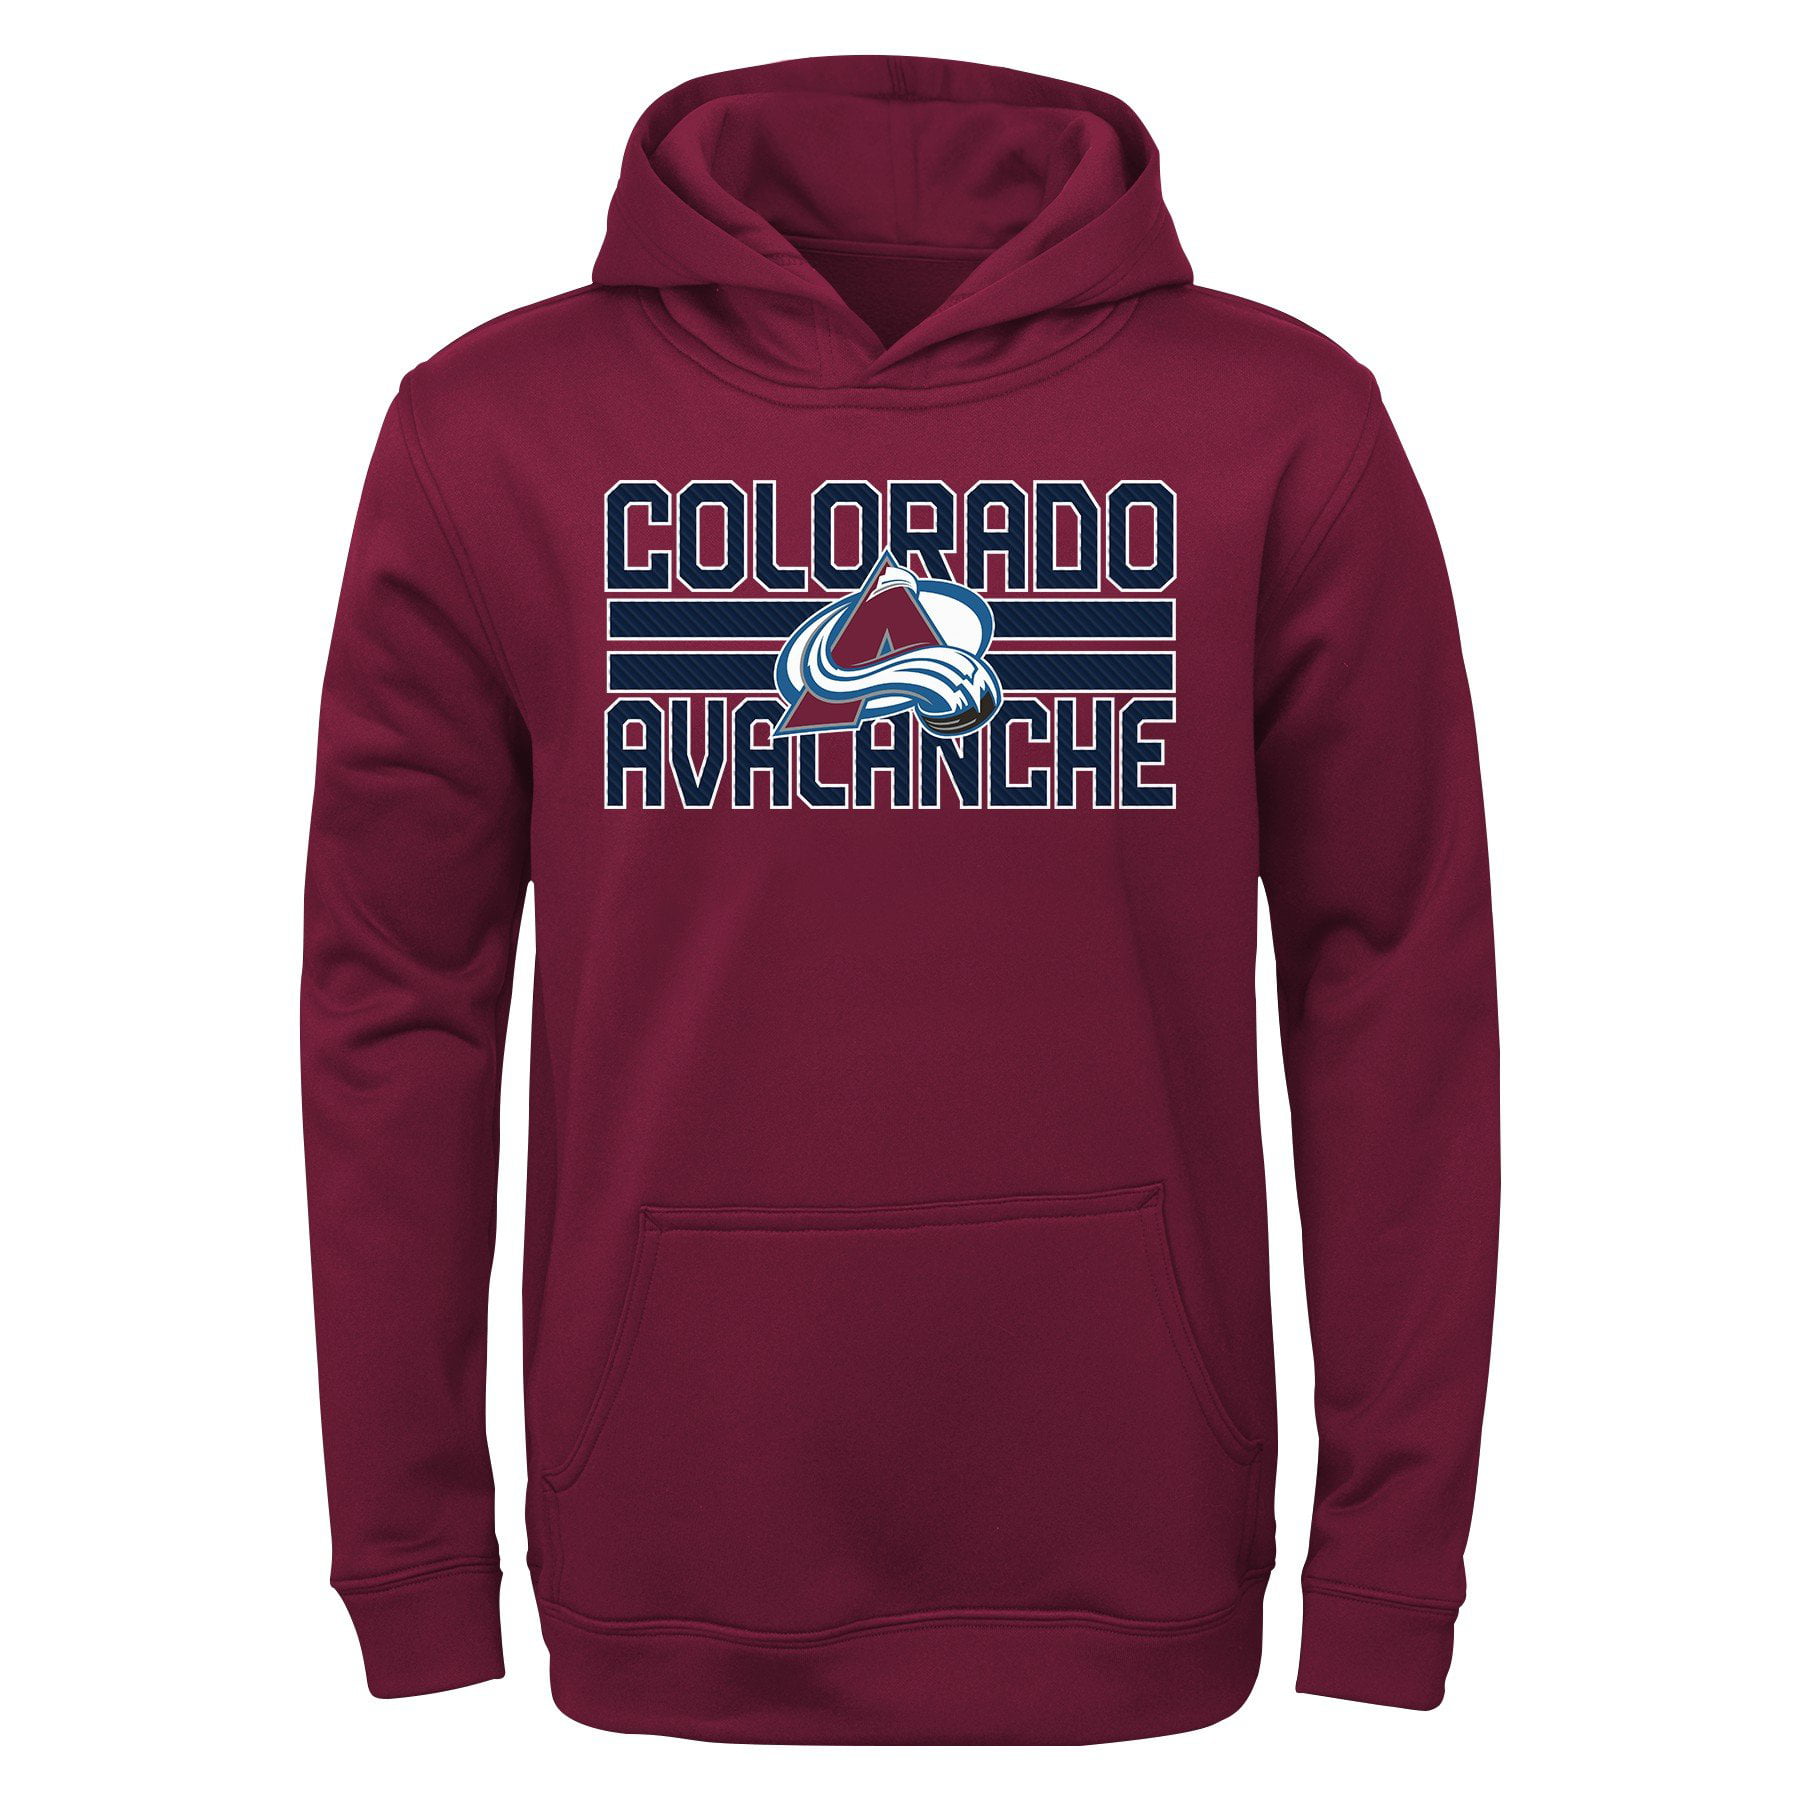 Outerstuff Youth NHL Colorado Avalanche '22-'23 Special Edition Pullover Hoodie - M Each